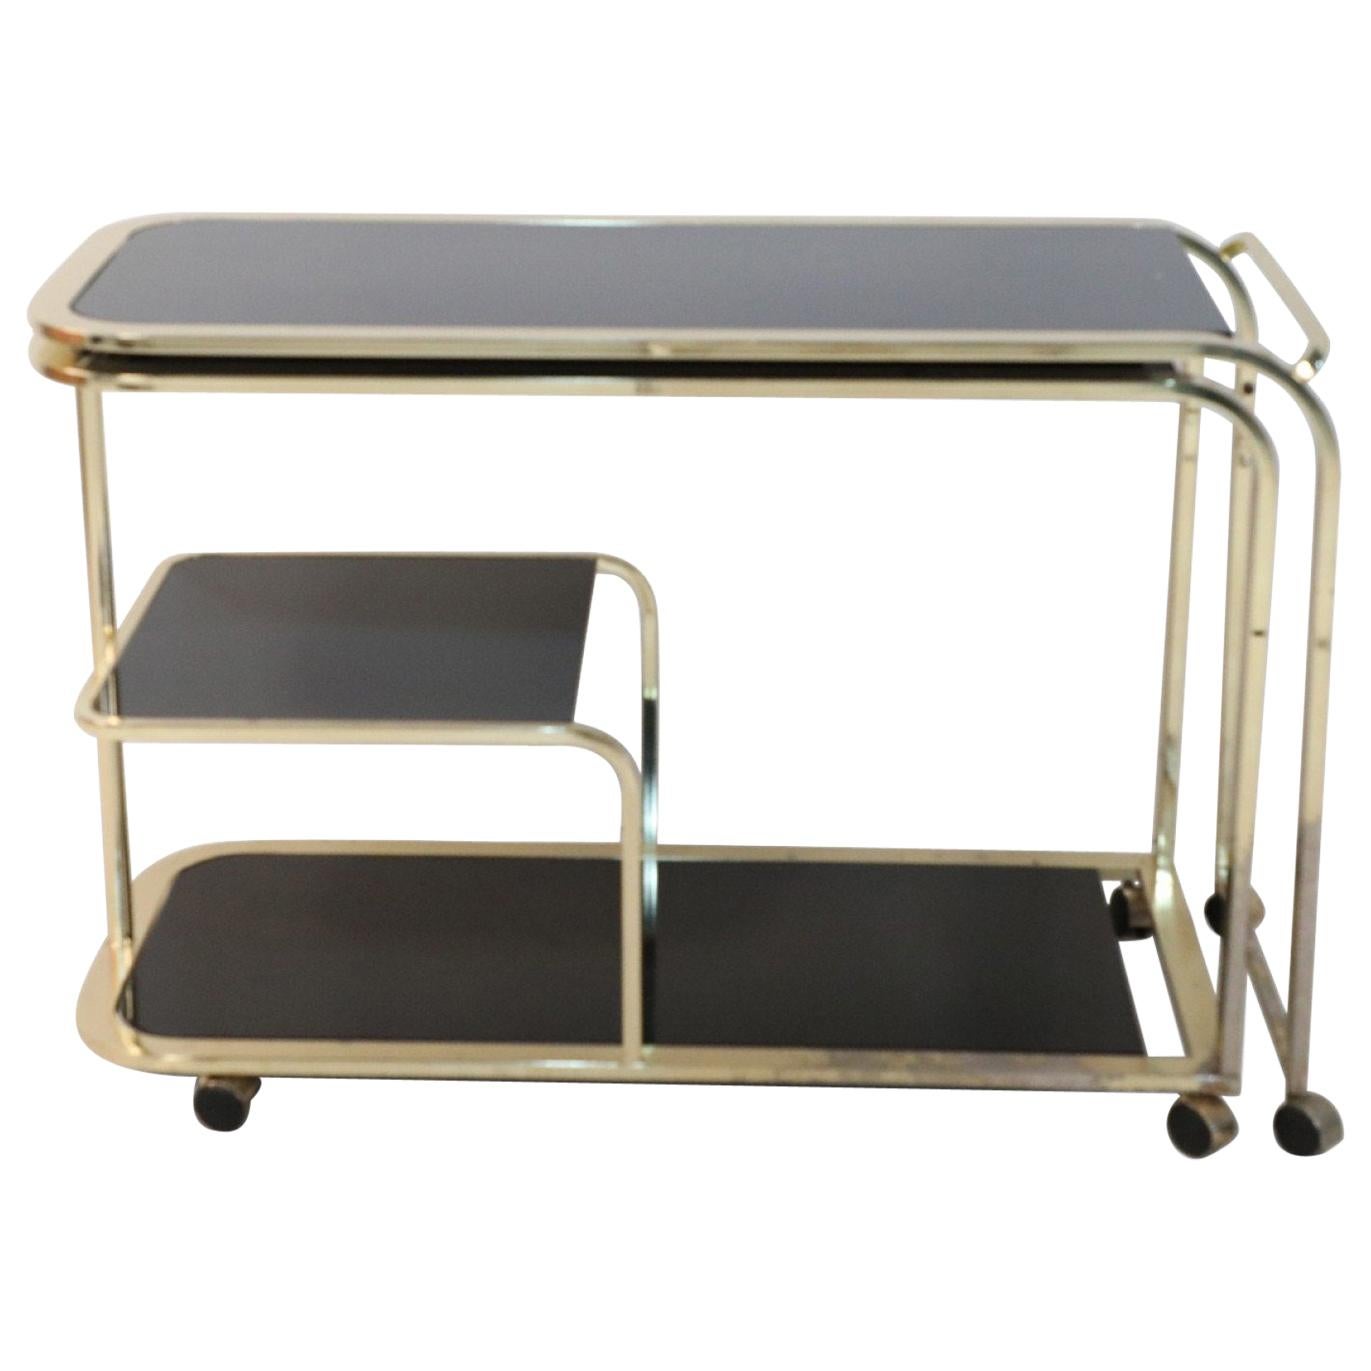 Design Institute of America Mid-Century Gilt Metal and Black Glass Bar Cart For Sale